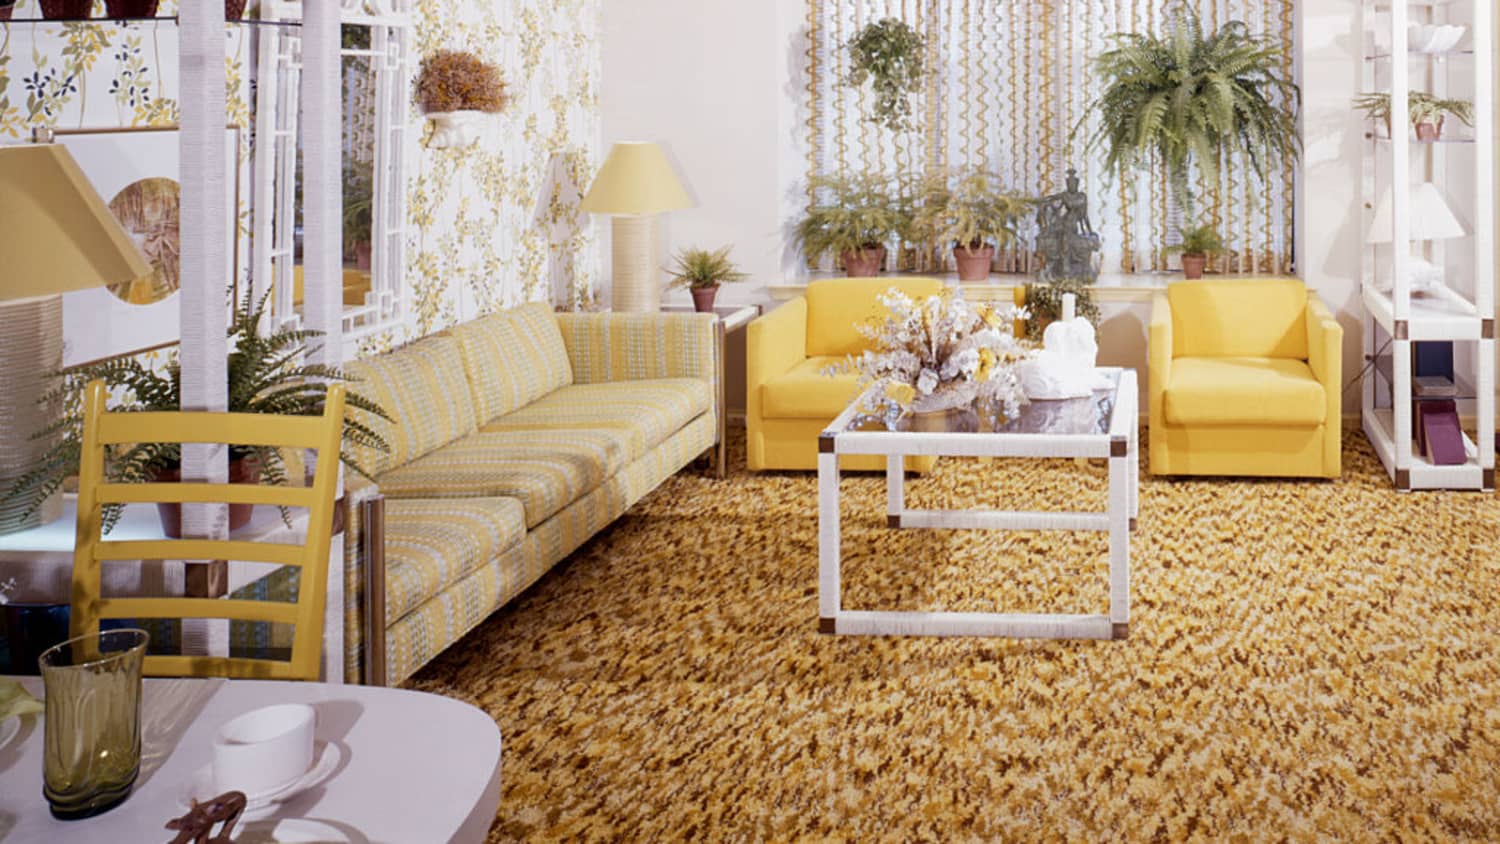 Why We Hate Wall-To-Wall Carpets | Apartment Therapy